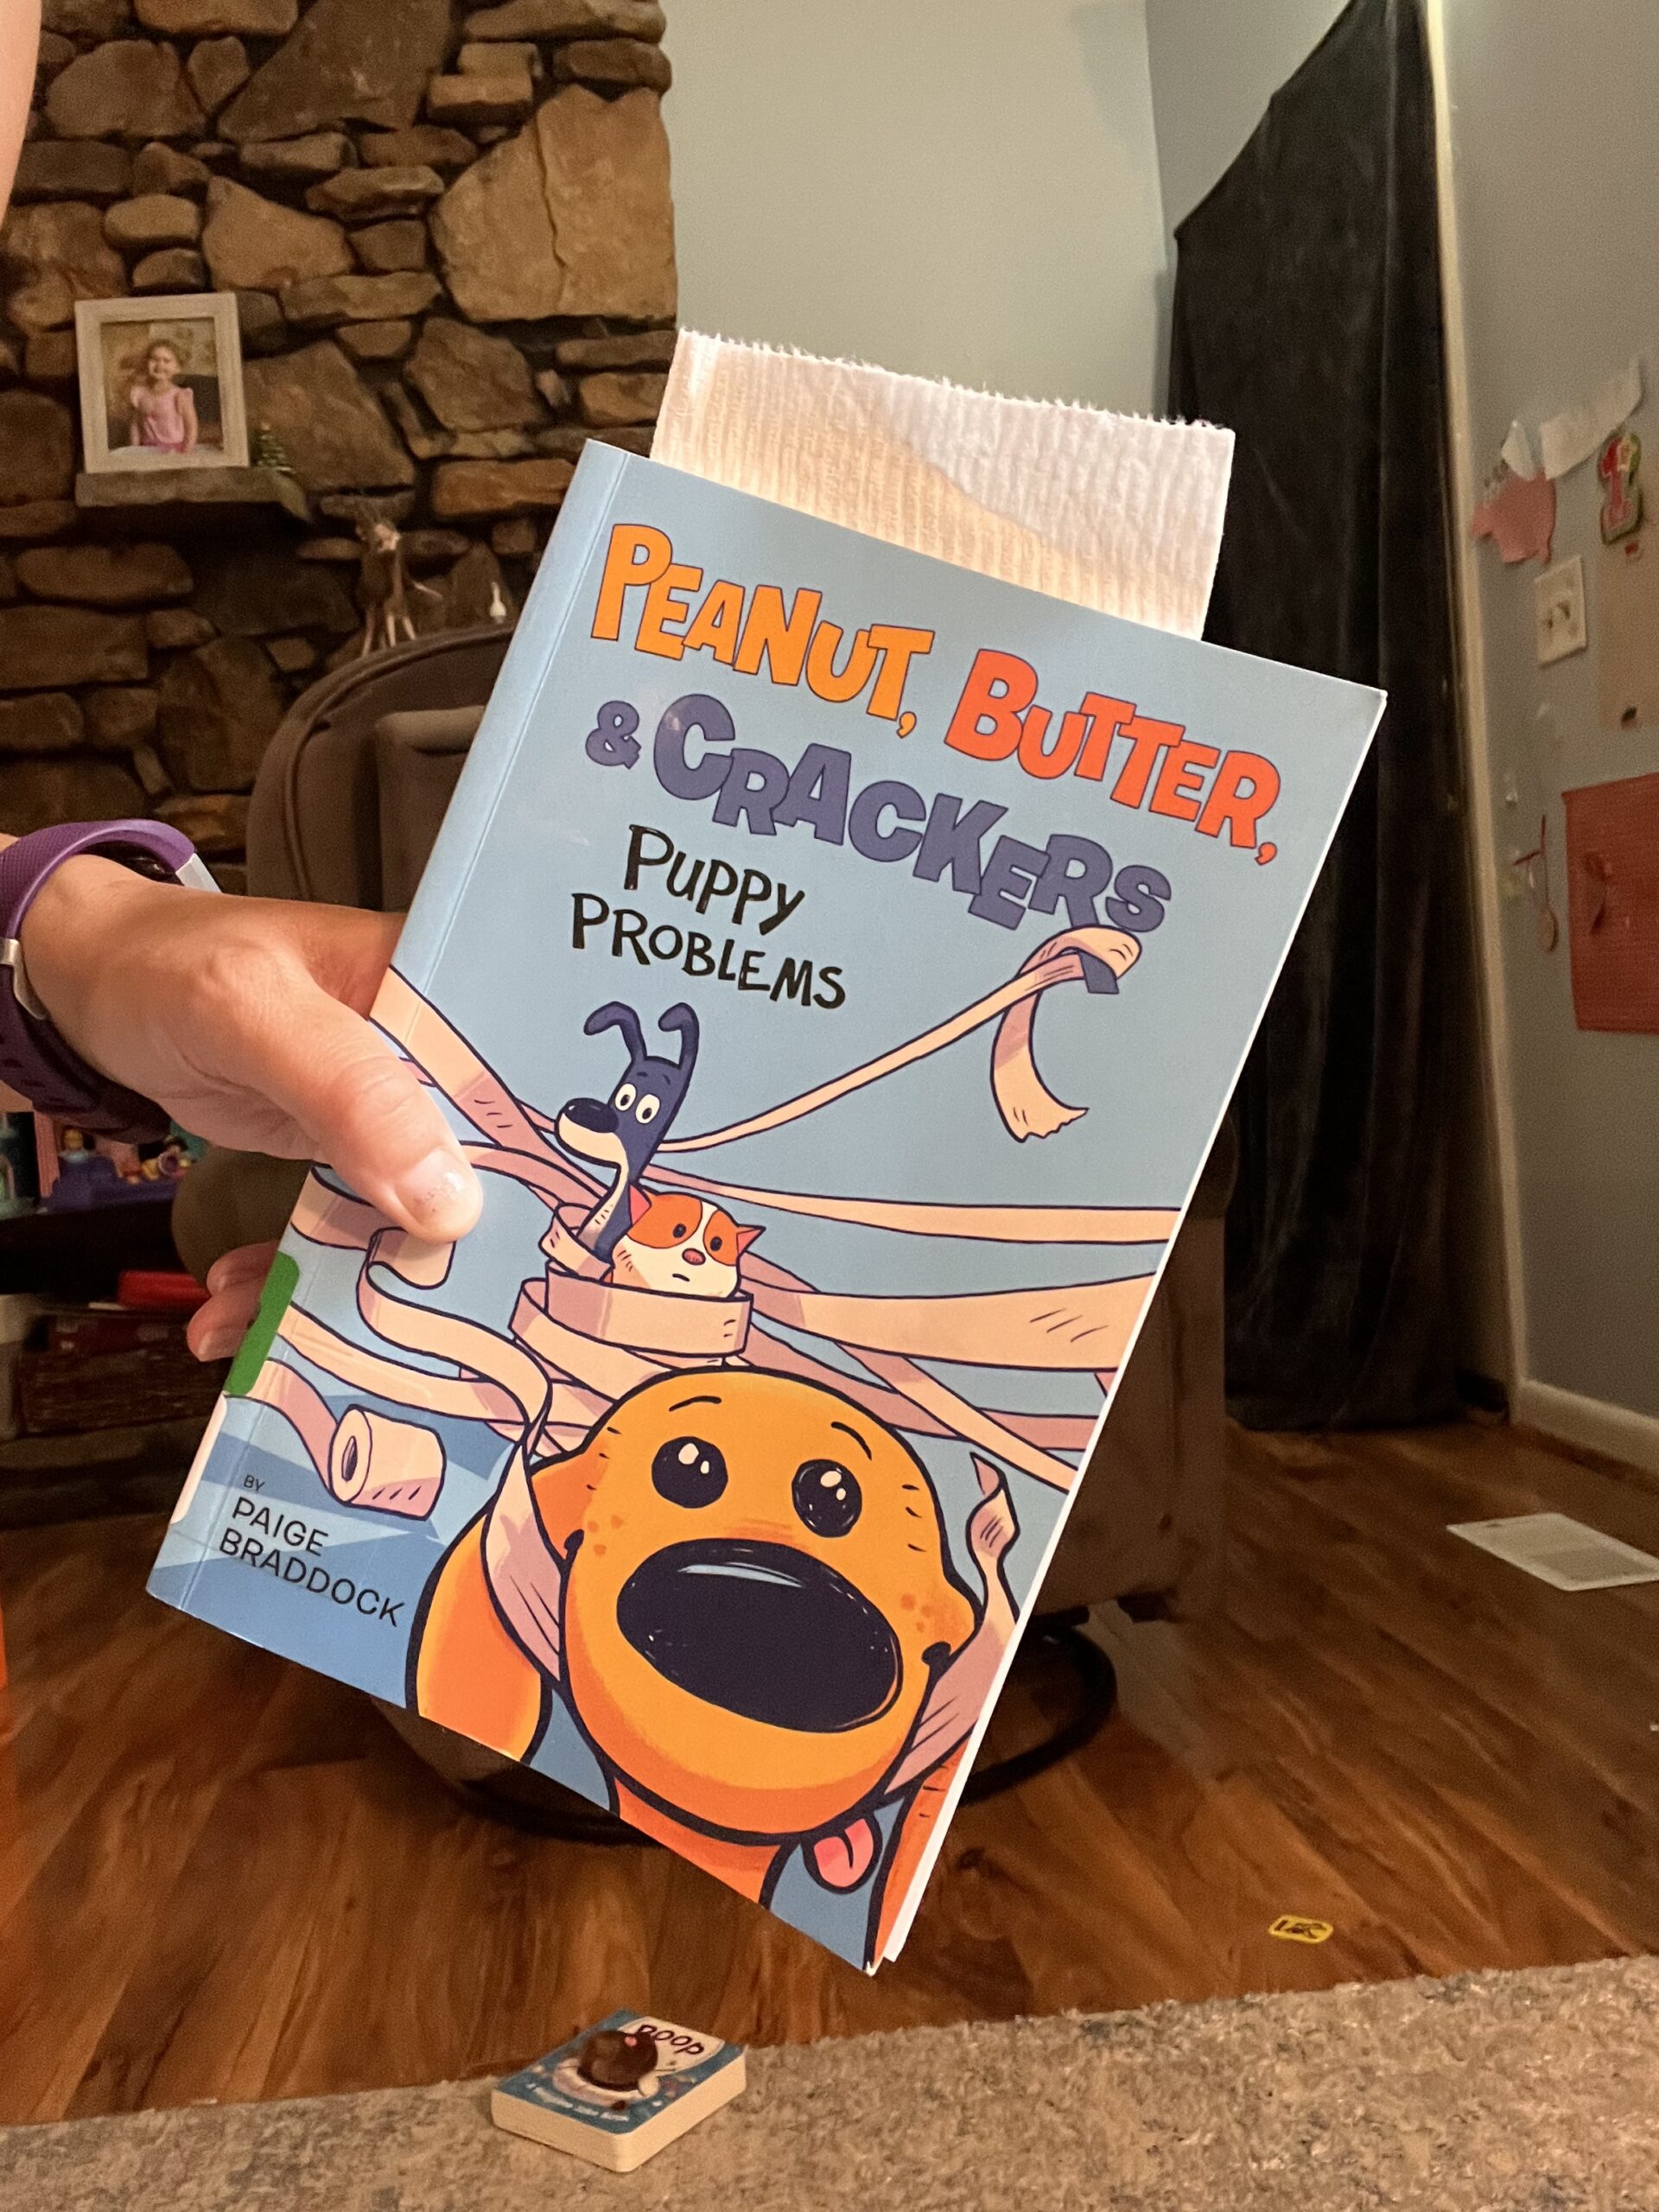 The book Peanut, Butter, and Crackers: Puppy Problems with a toilet paper book mark